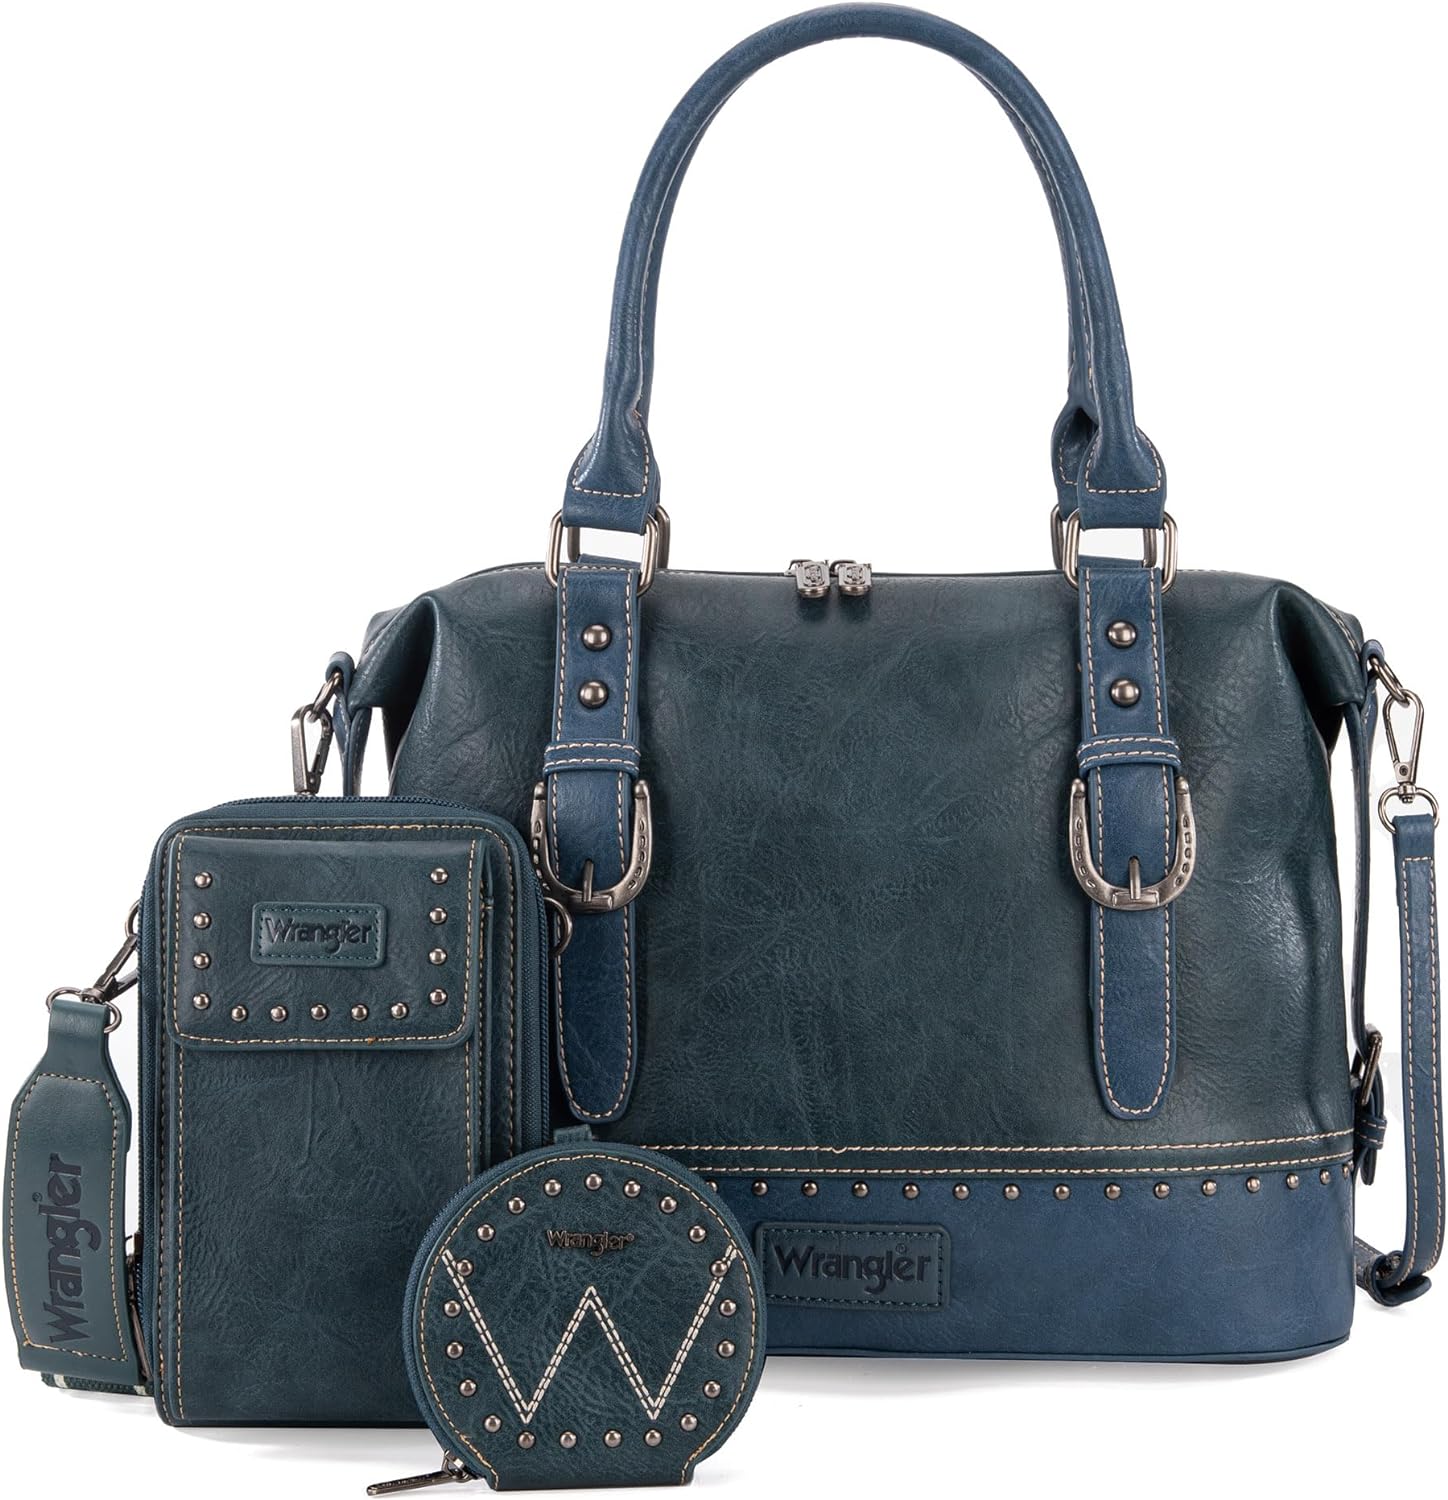 Wrangler 3Pcs Doctor Bag Sets for Women Top-handle Satchel Bag with Cell Phone Handbags and Coin Purse